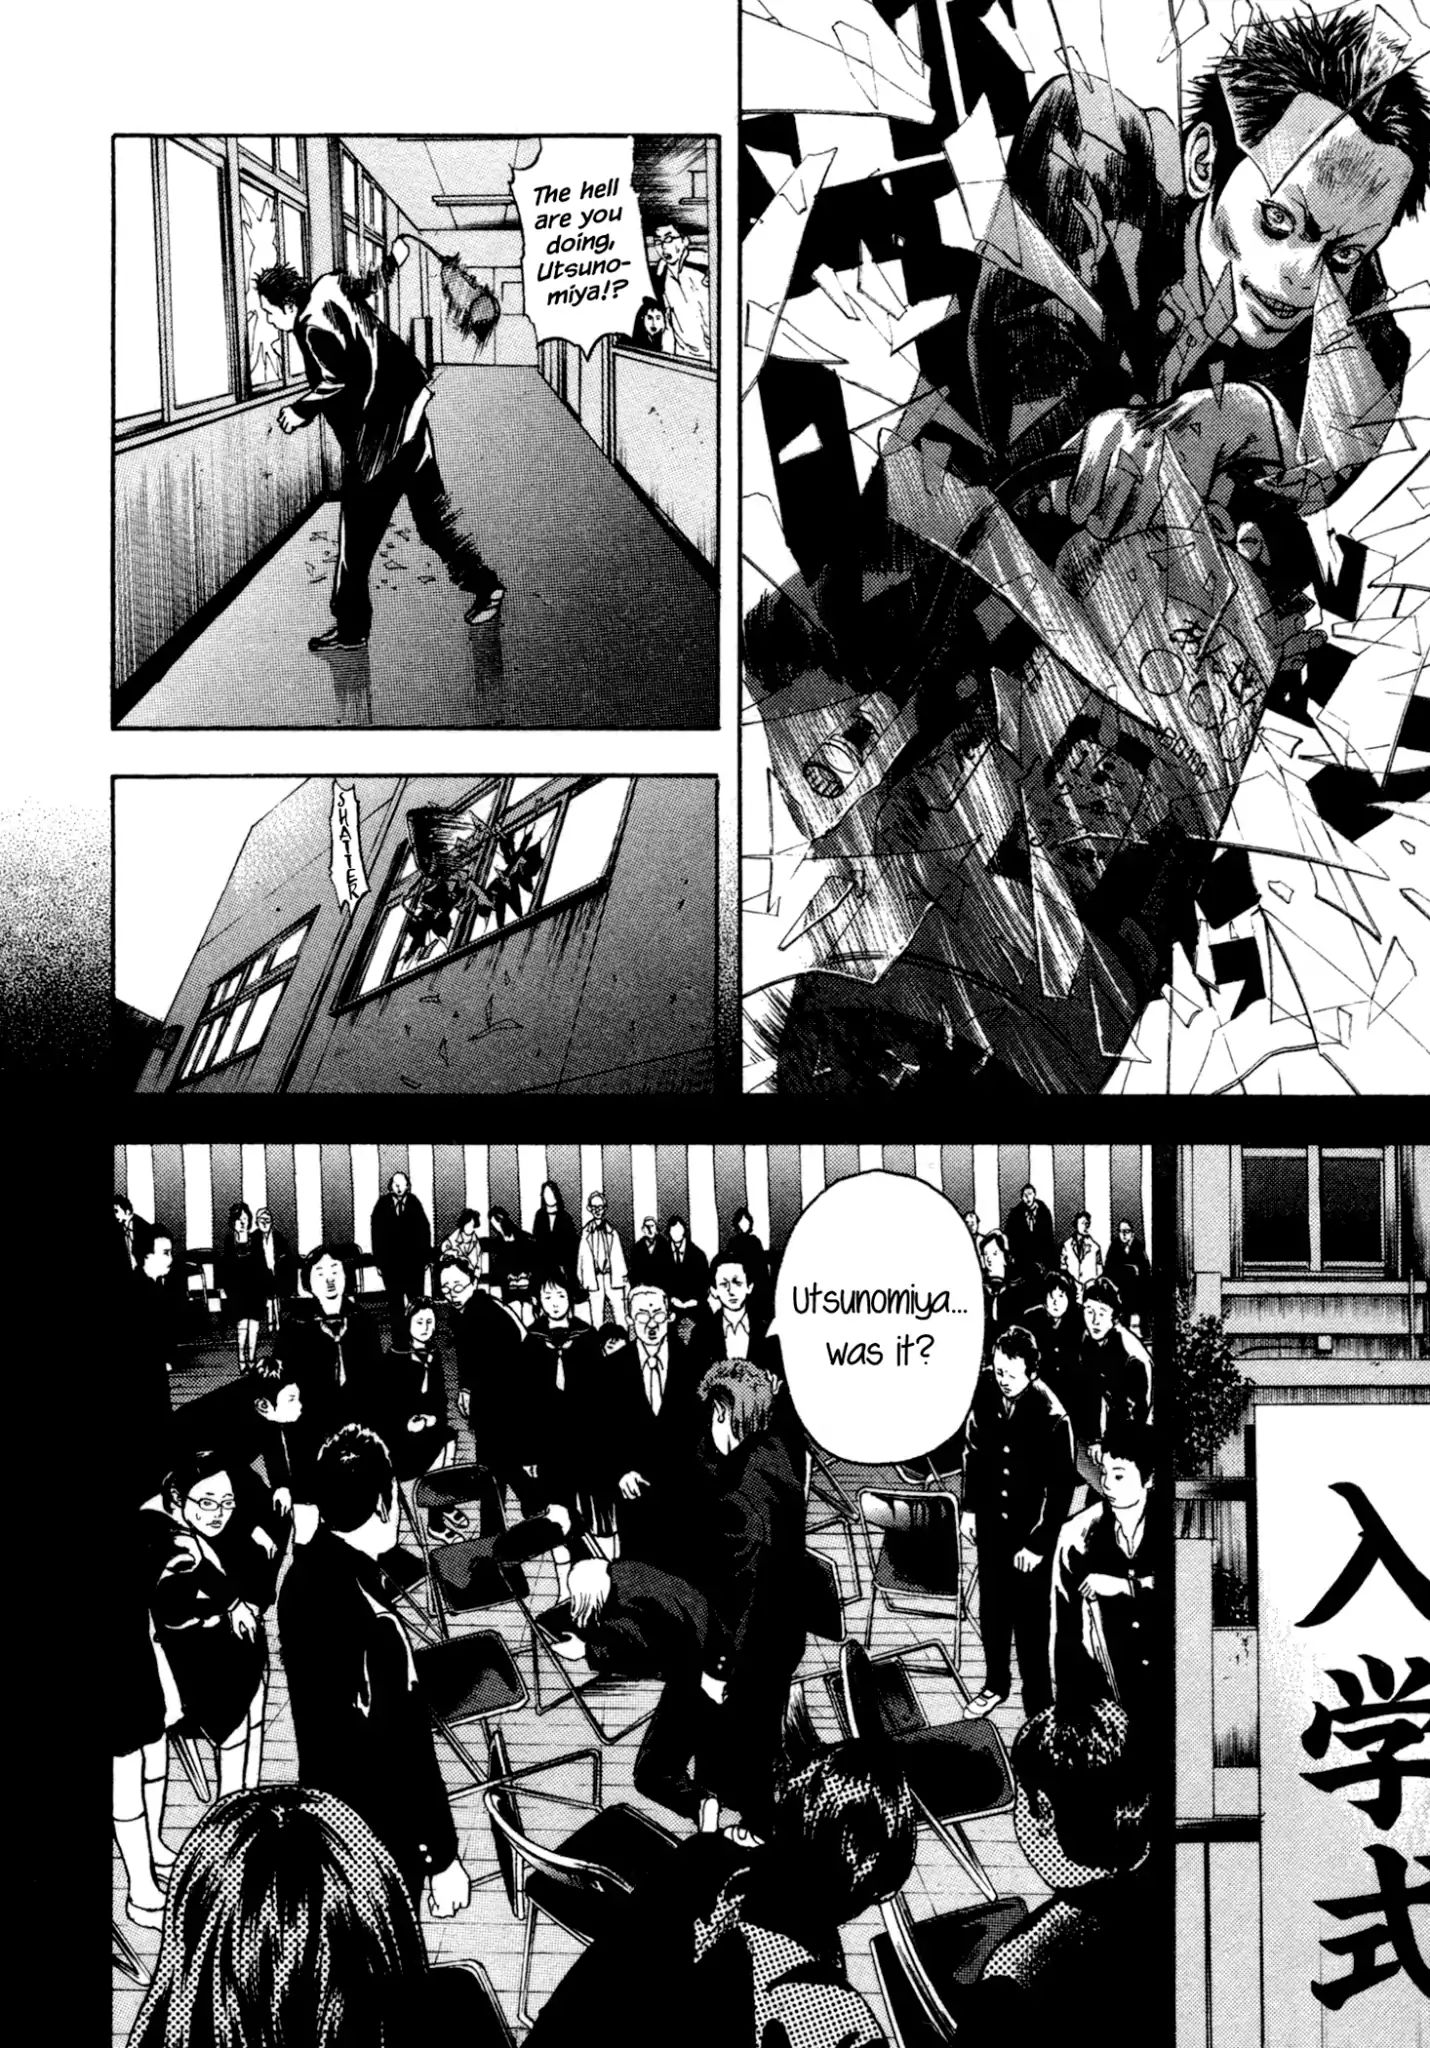 Yankee Go To Juku Vol.1 Chapter 2: That Junior, He's the Worst